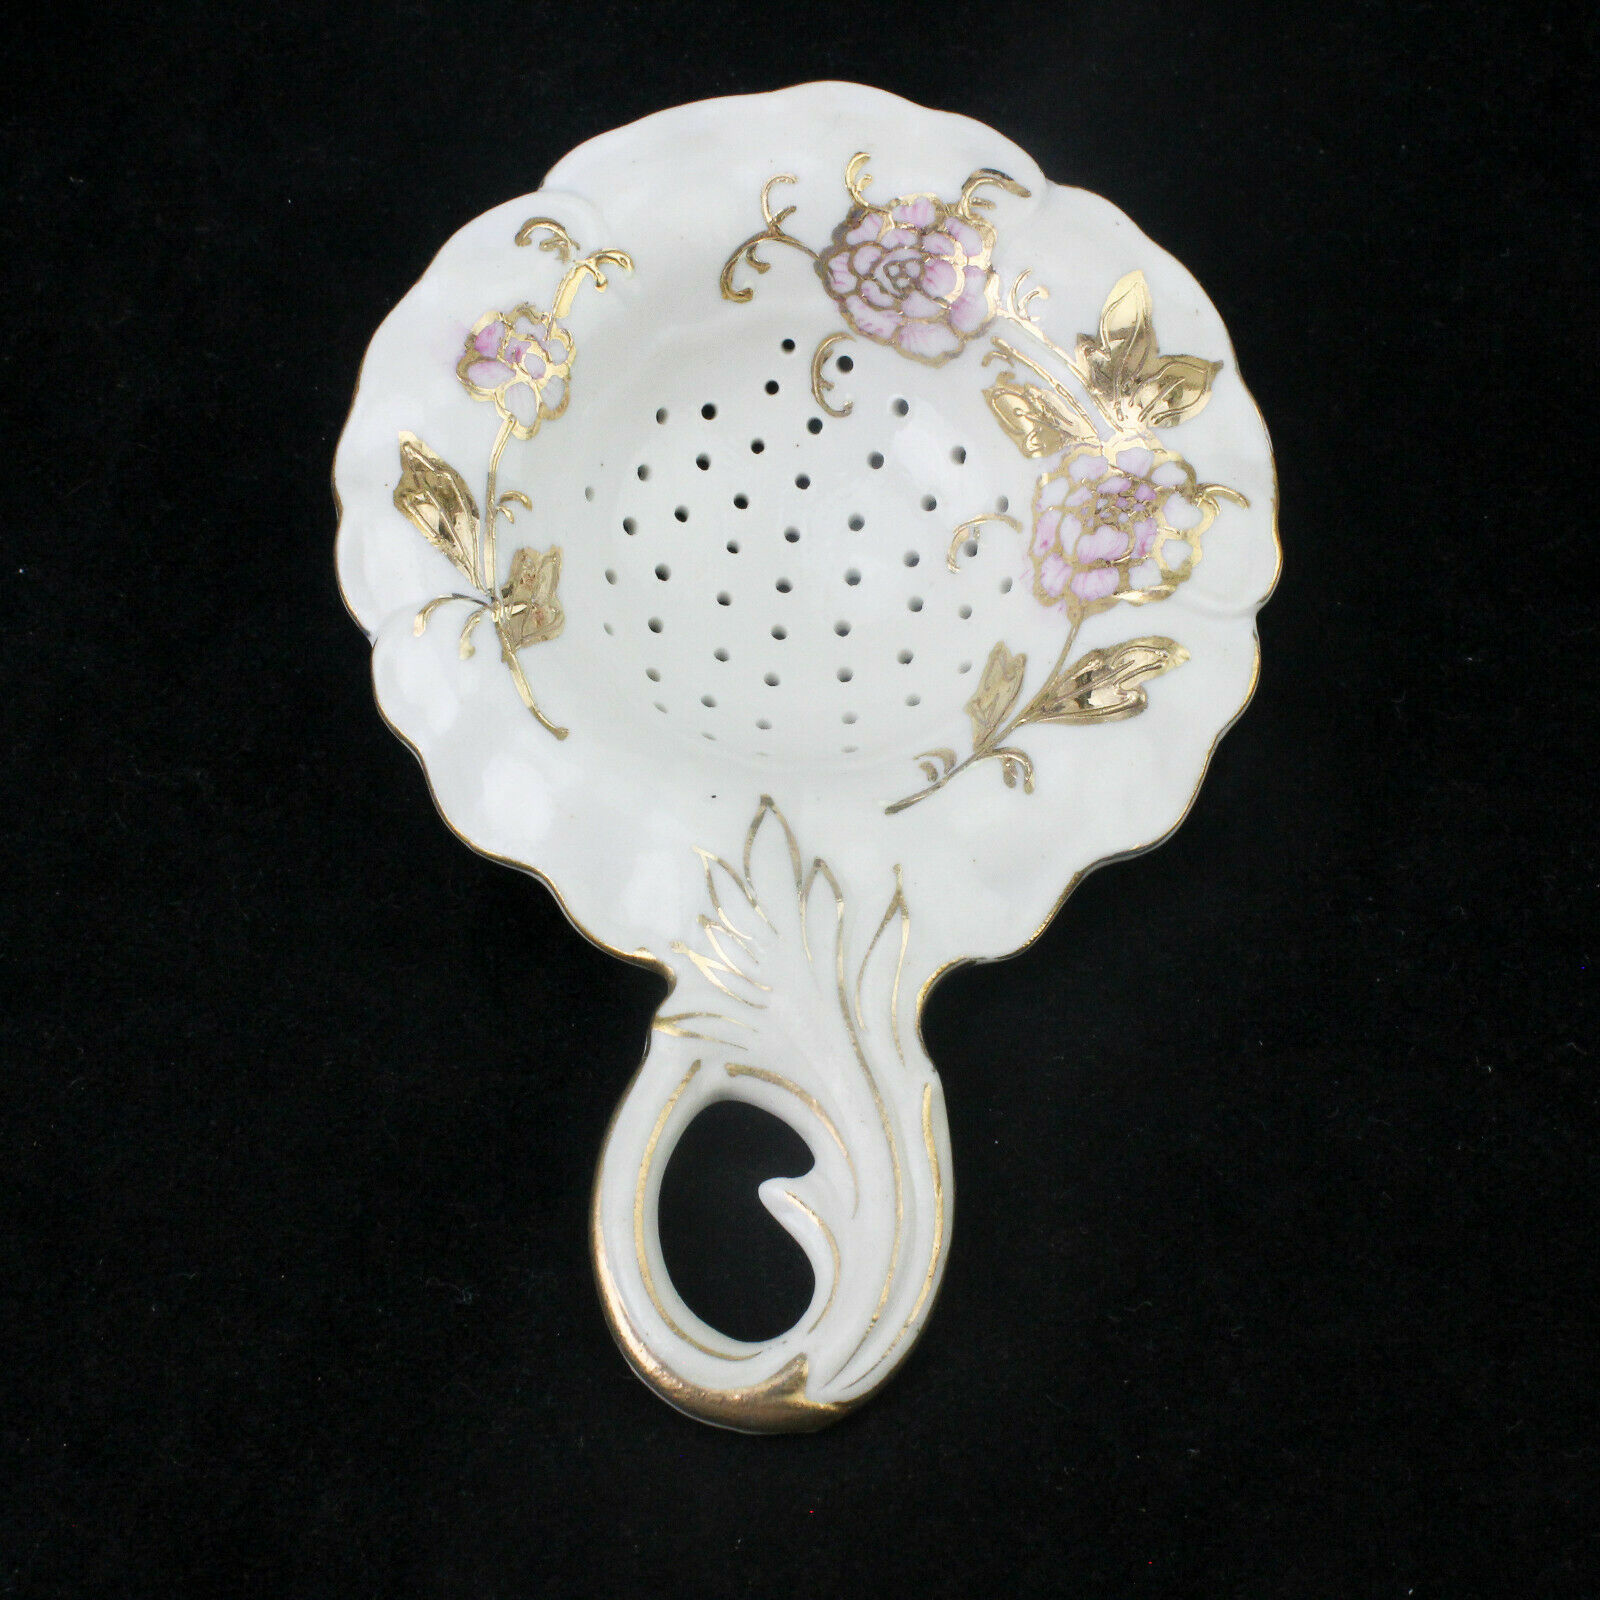 Vintage Porcelain Tea Strainer White With Hand Painted Gold & Pink Flowers